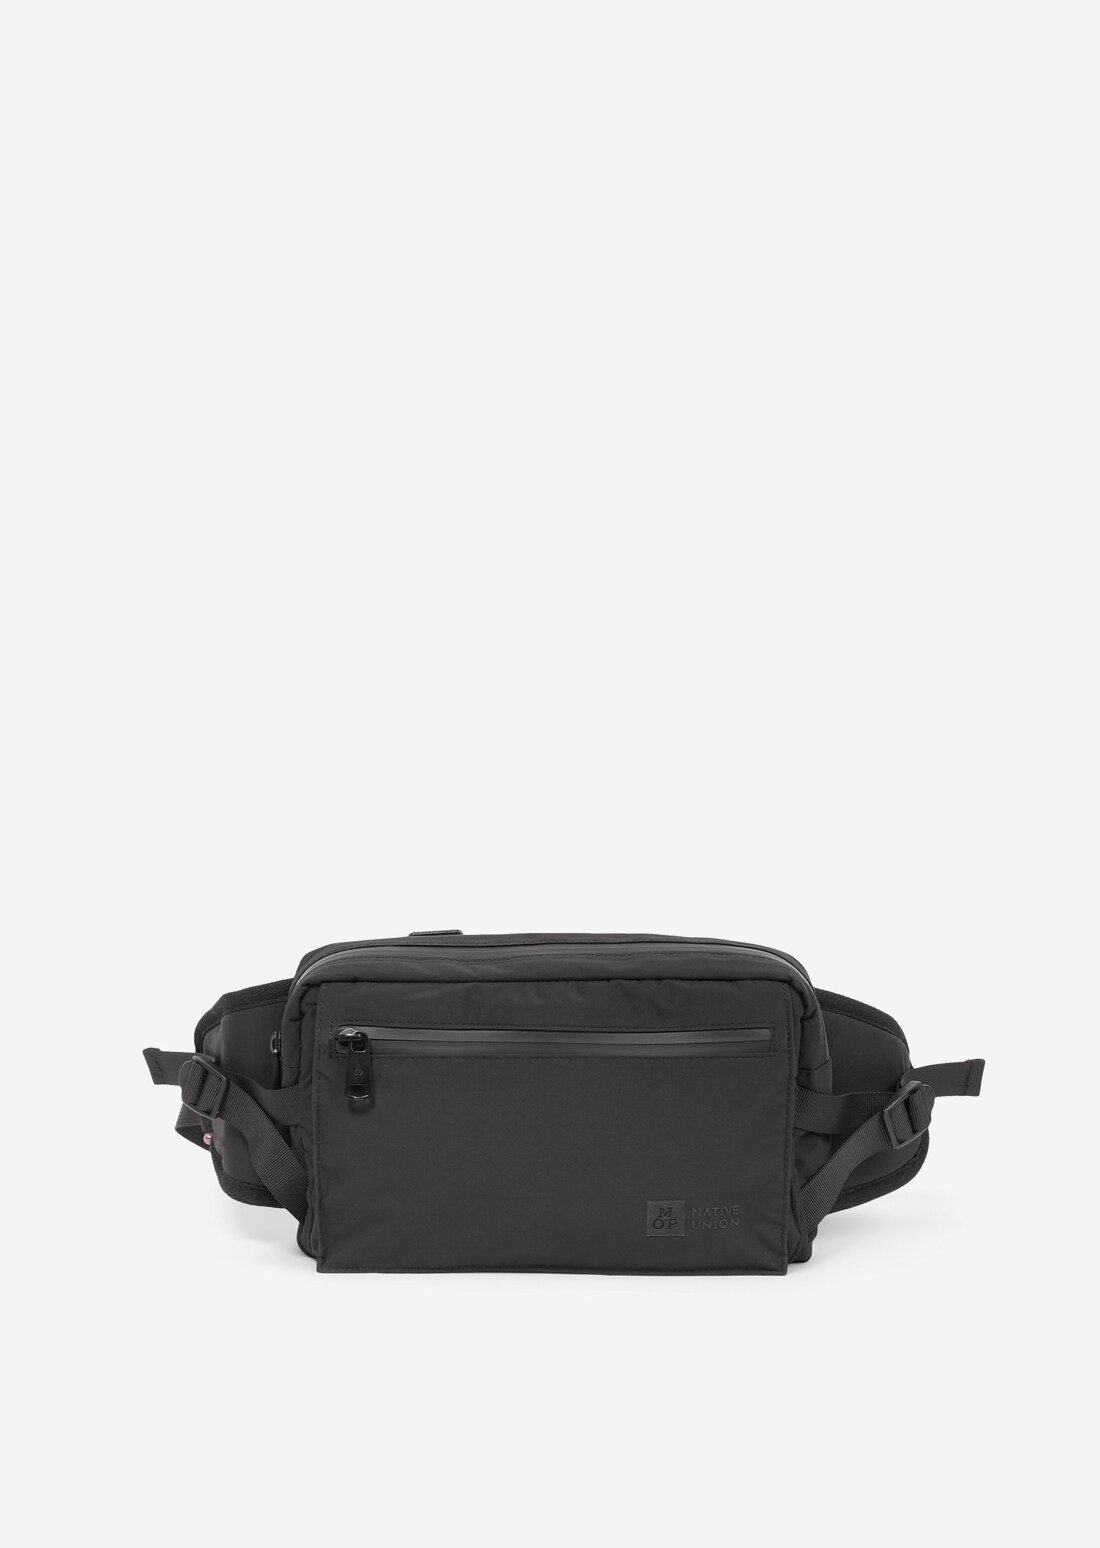 MO'P x NATIVE UNION Crossbody Bag with numerous features - black ...